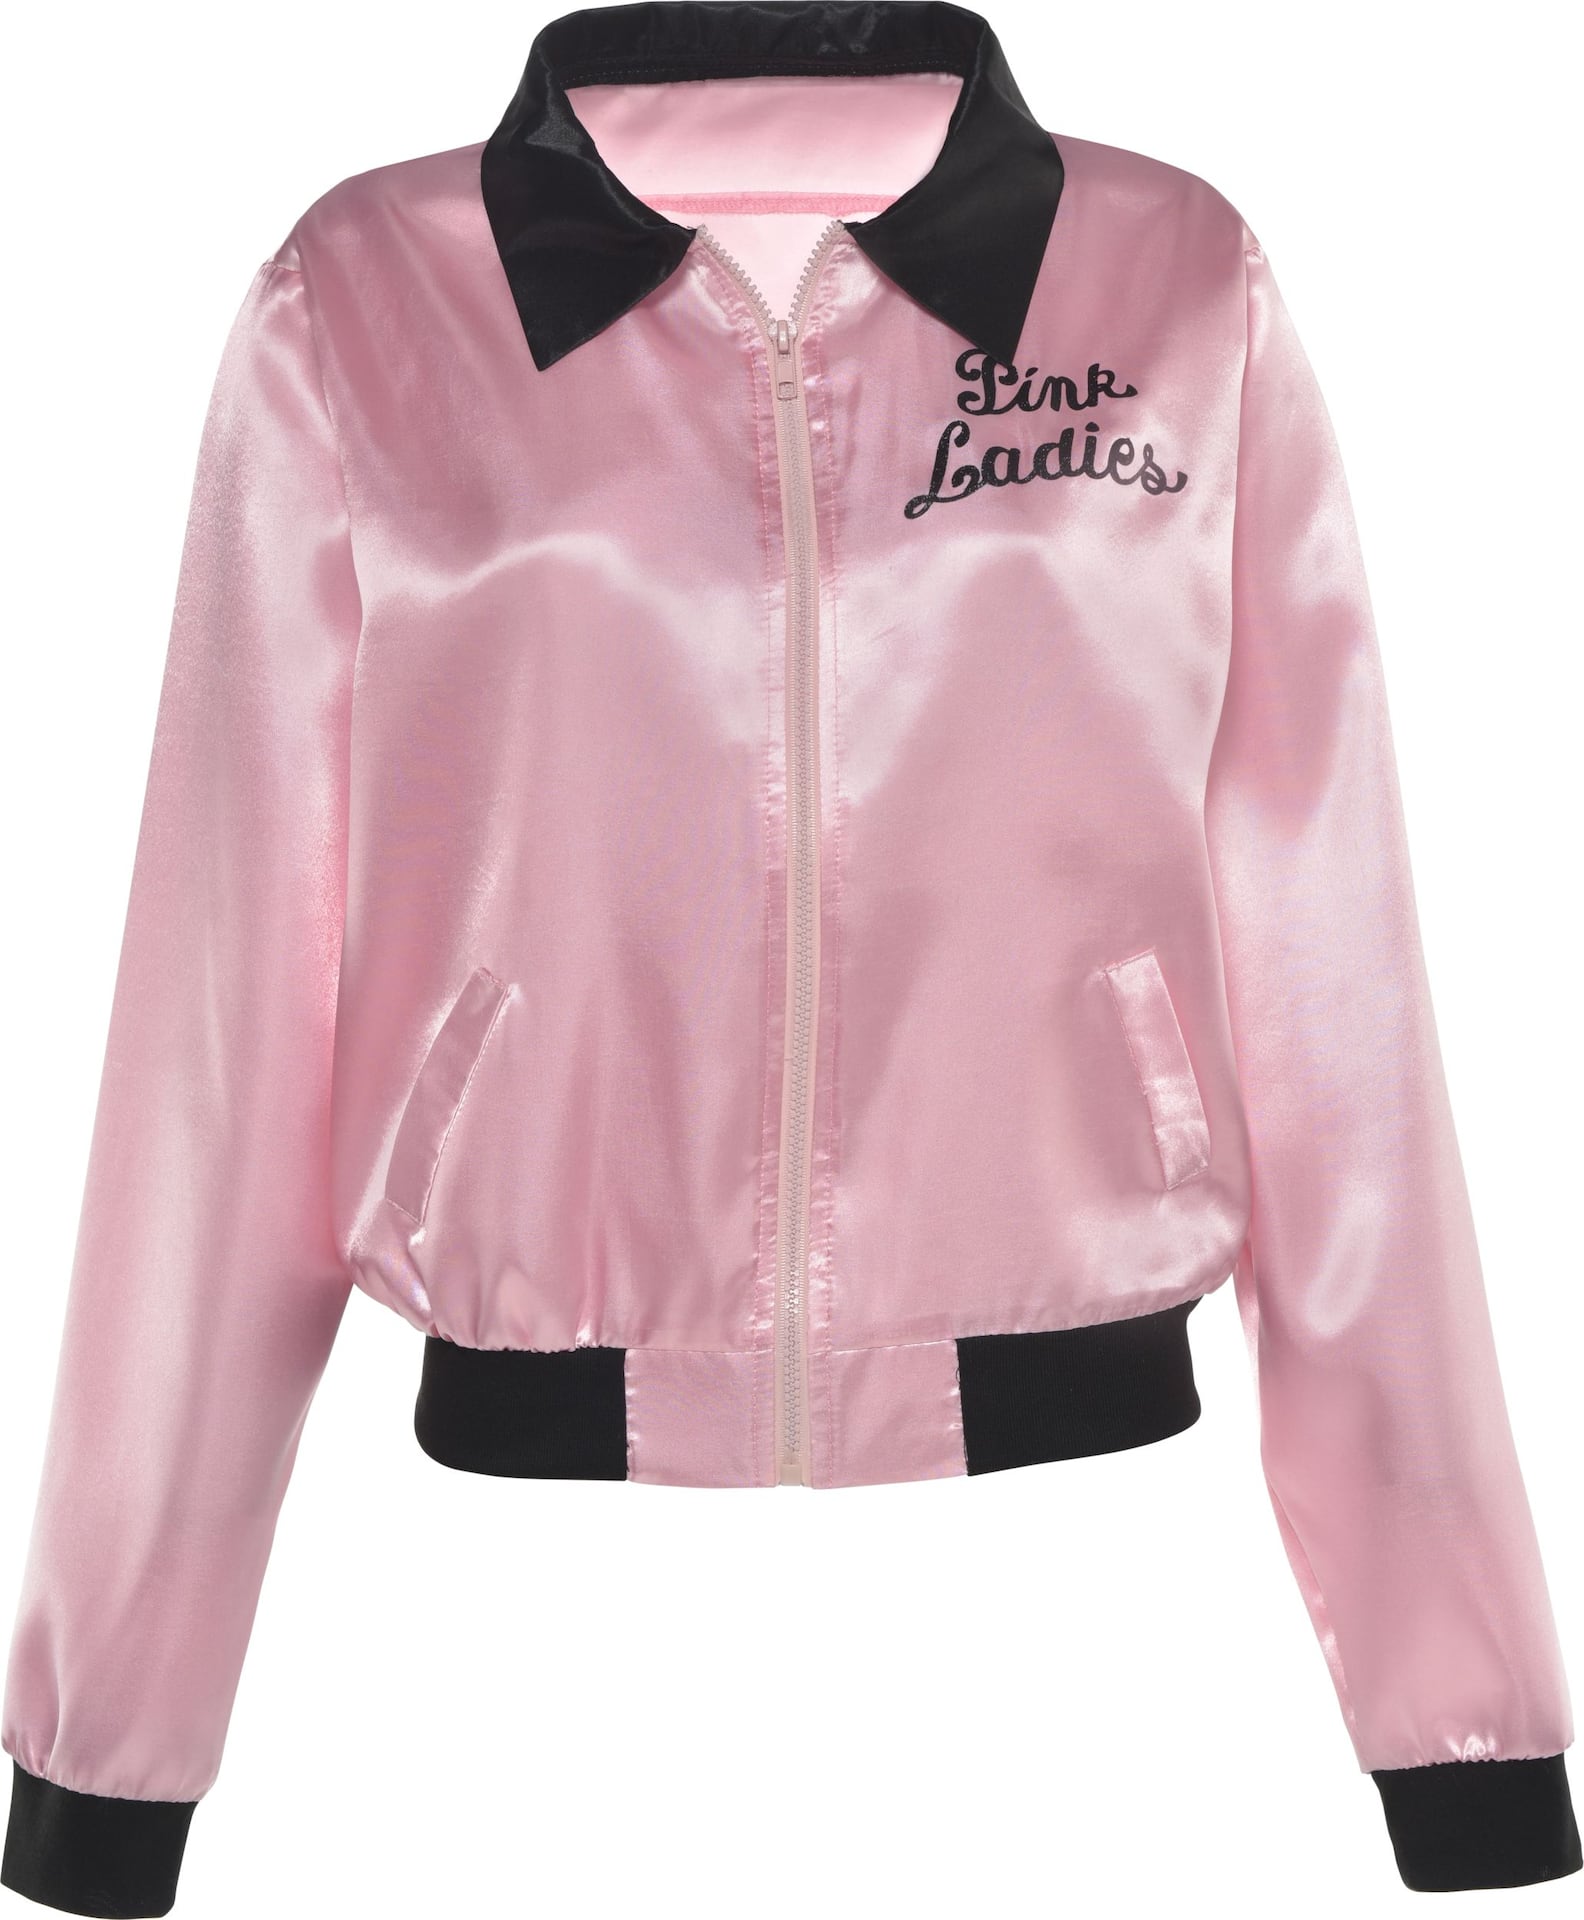 https://media-www.canadiantire.ca/product/seasonal-gardening/party-city-seasonal/party-city-halloween-and-fall-decor/8510051/pc-grease-pink-ladies-jacket-4a3f11c4-b91c-455b-8b83-9a57c43594dc-jpgrendition.jpg